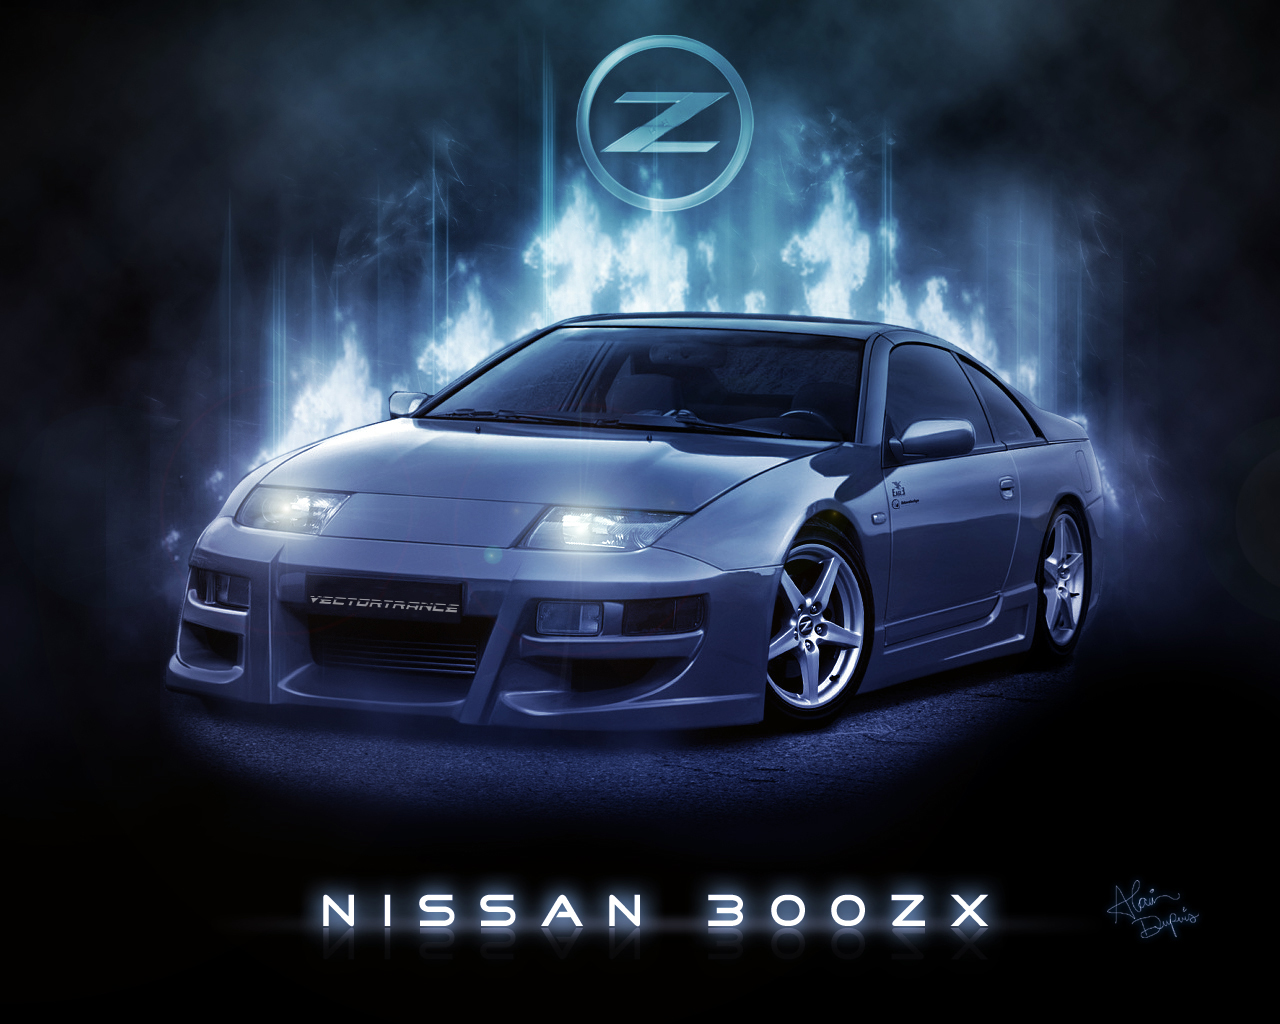 Nissan 300zx By Vectortrance